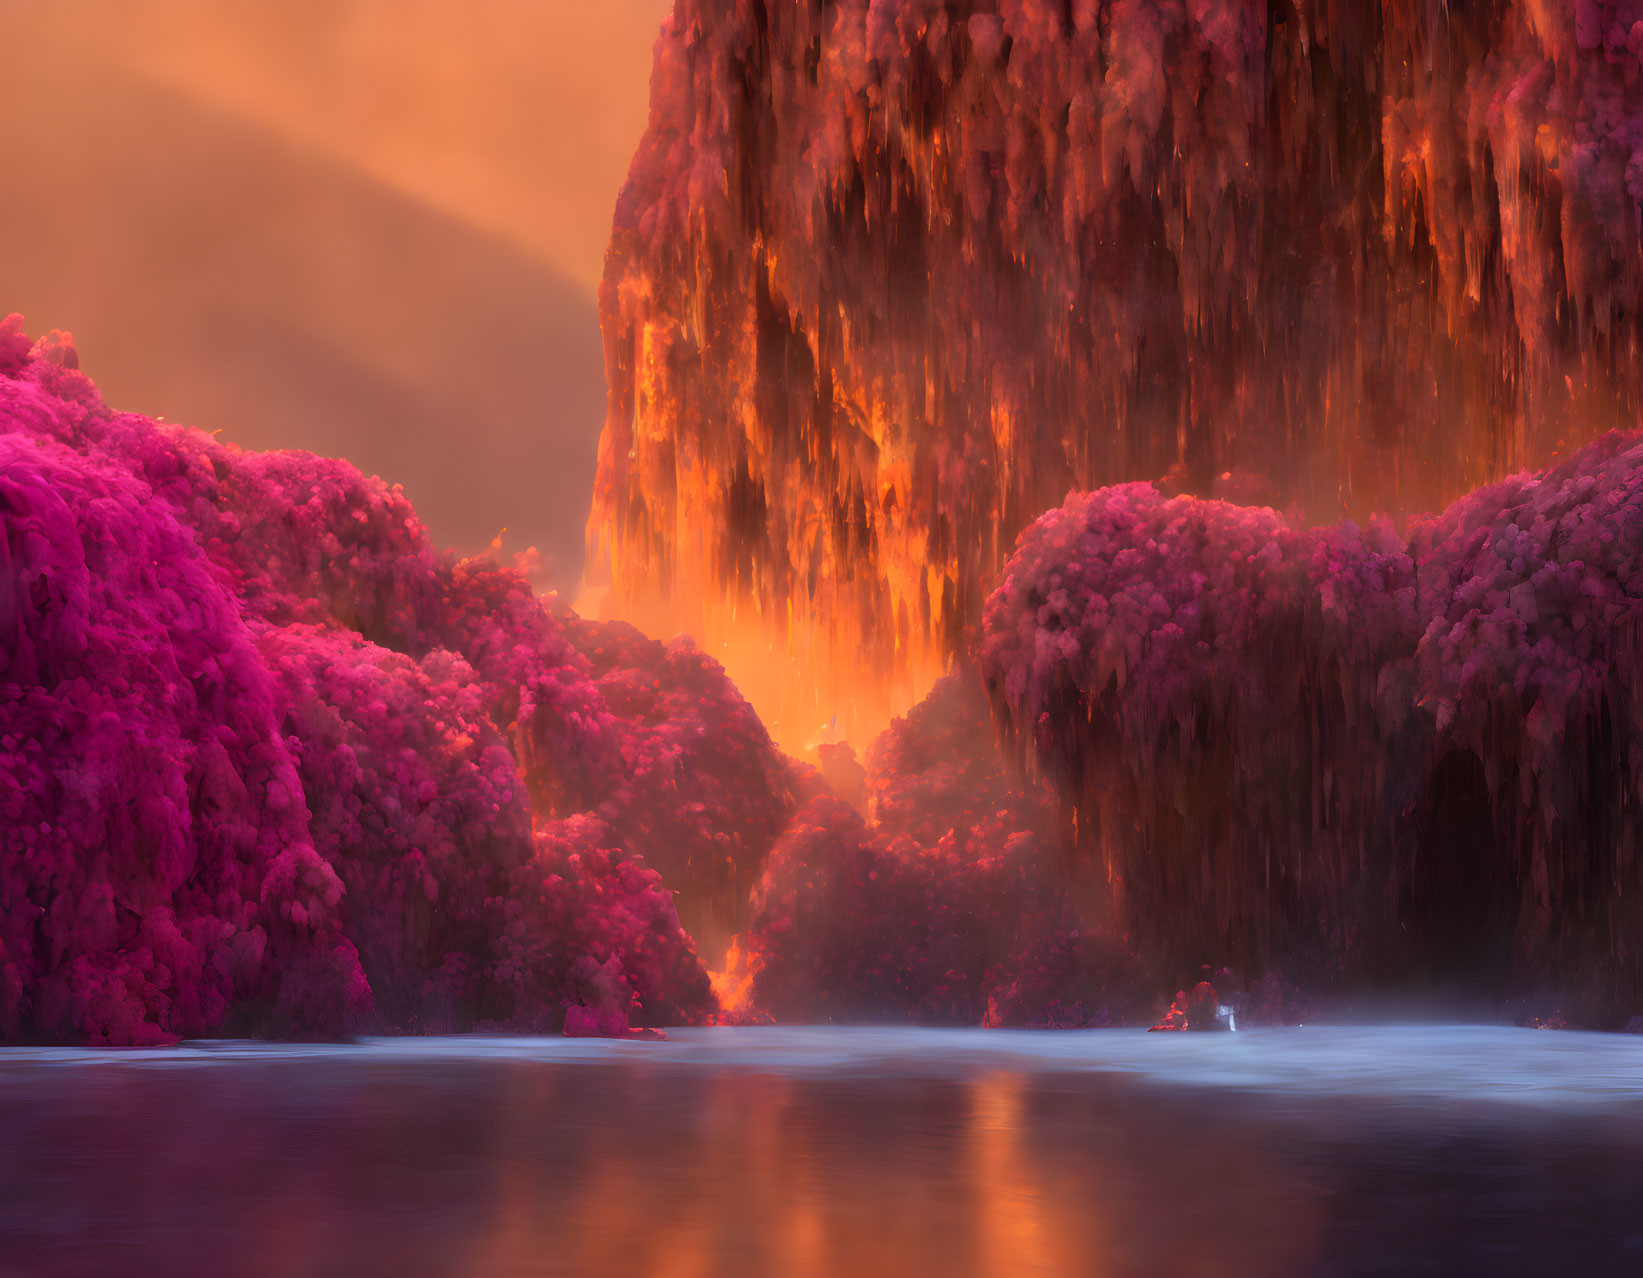 Vibrant pink forest with river under fiery orange sky